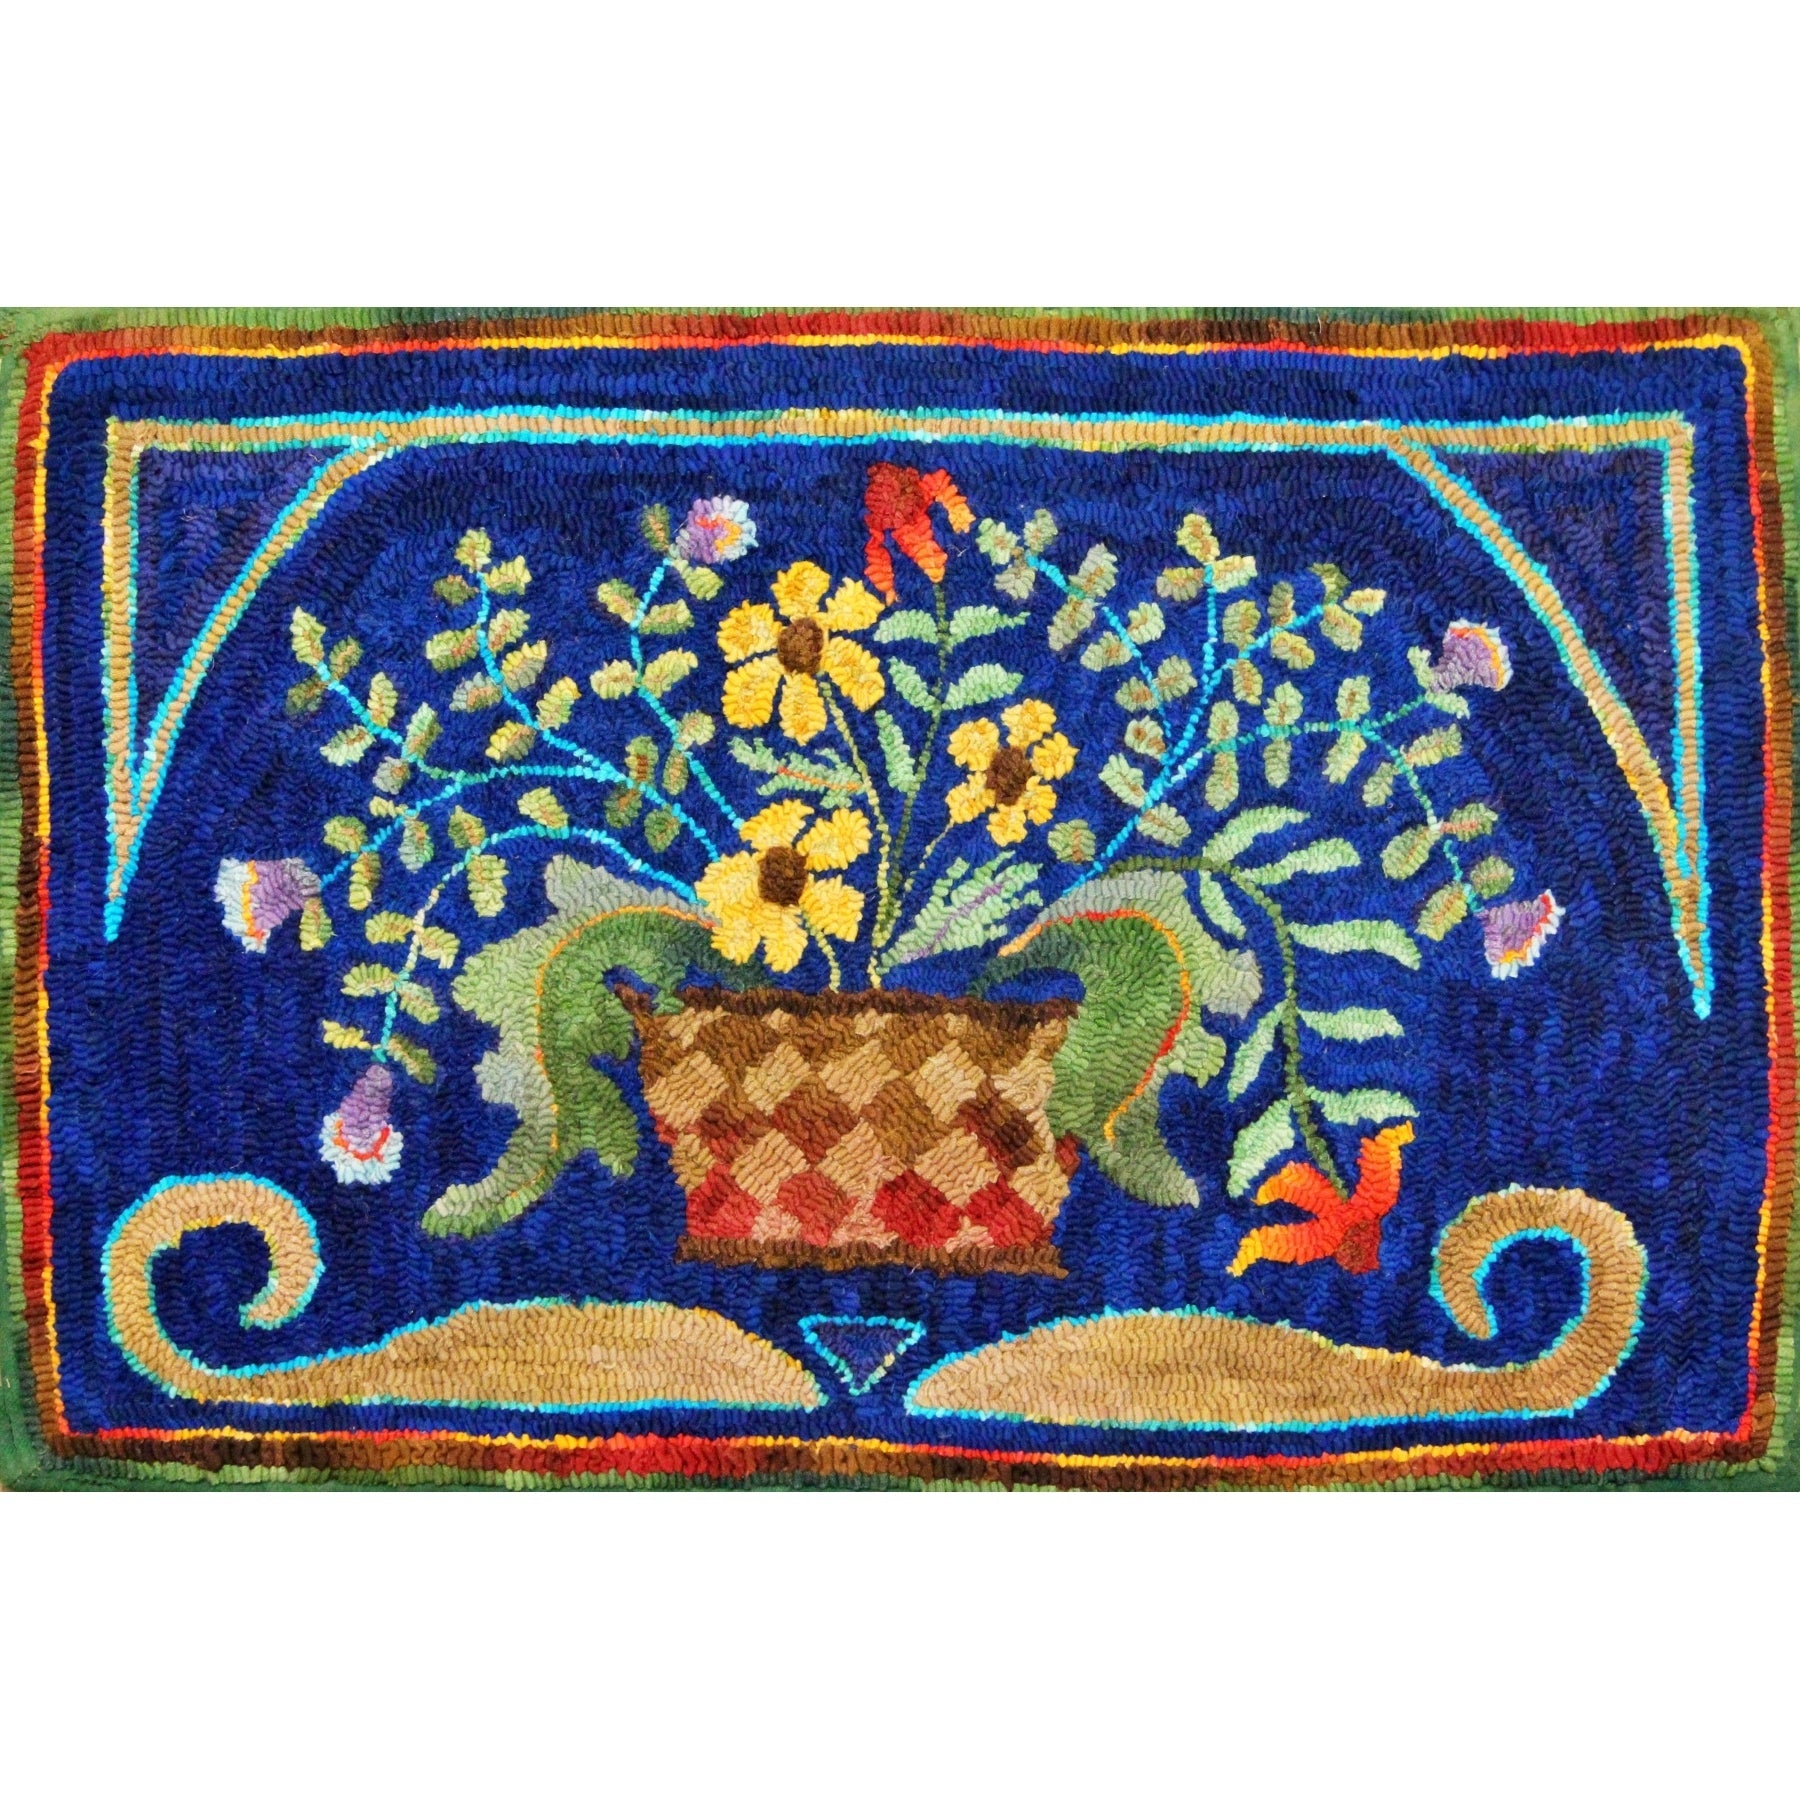 Basket Of Flowers, rug hooked by Melissa Pattacini